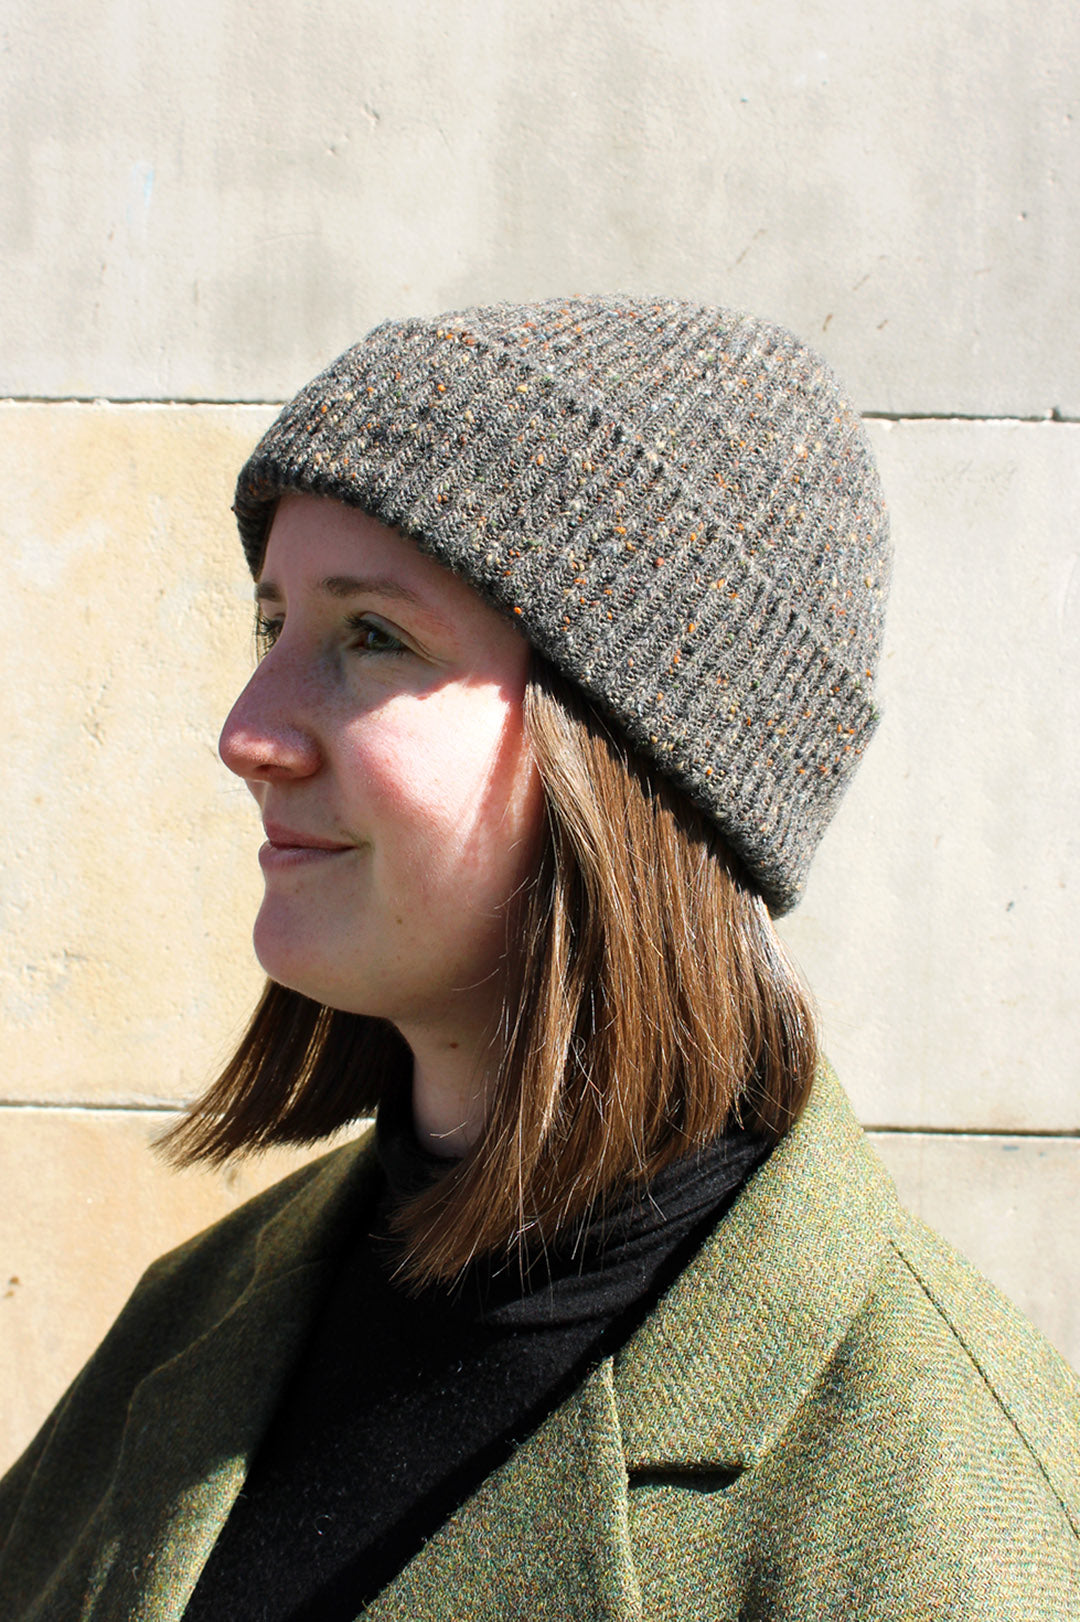 Knitted ribbed beanie hat in mushroom brown Donegal yarn with flecks of camel, rust and blue grey through it. Scottish Textiles Showcase.